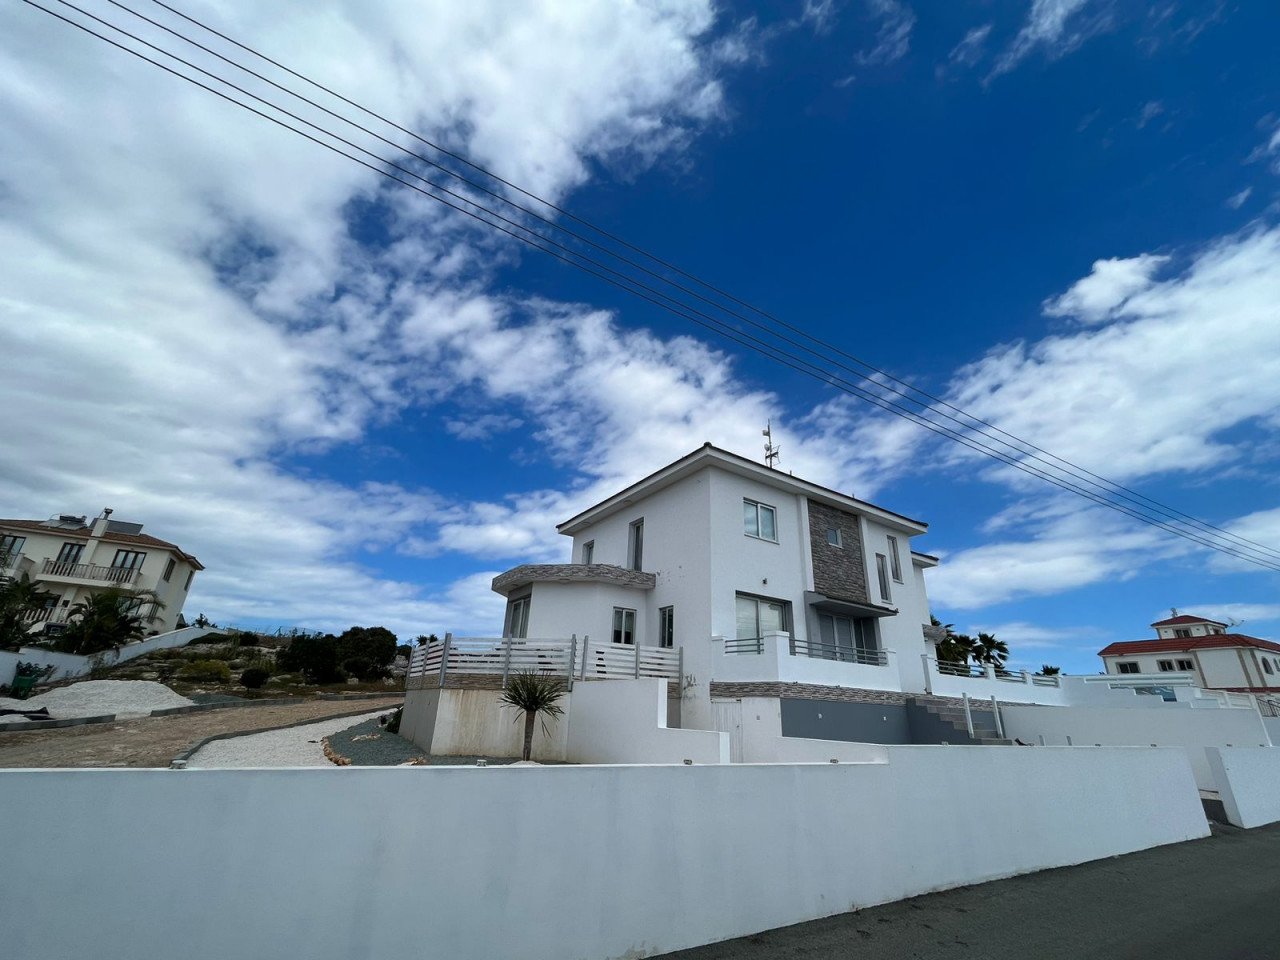 Property for Sale: House (Detached) in Paralimni, Famagusta  | Key Realtor Cyprus